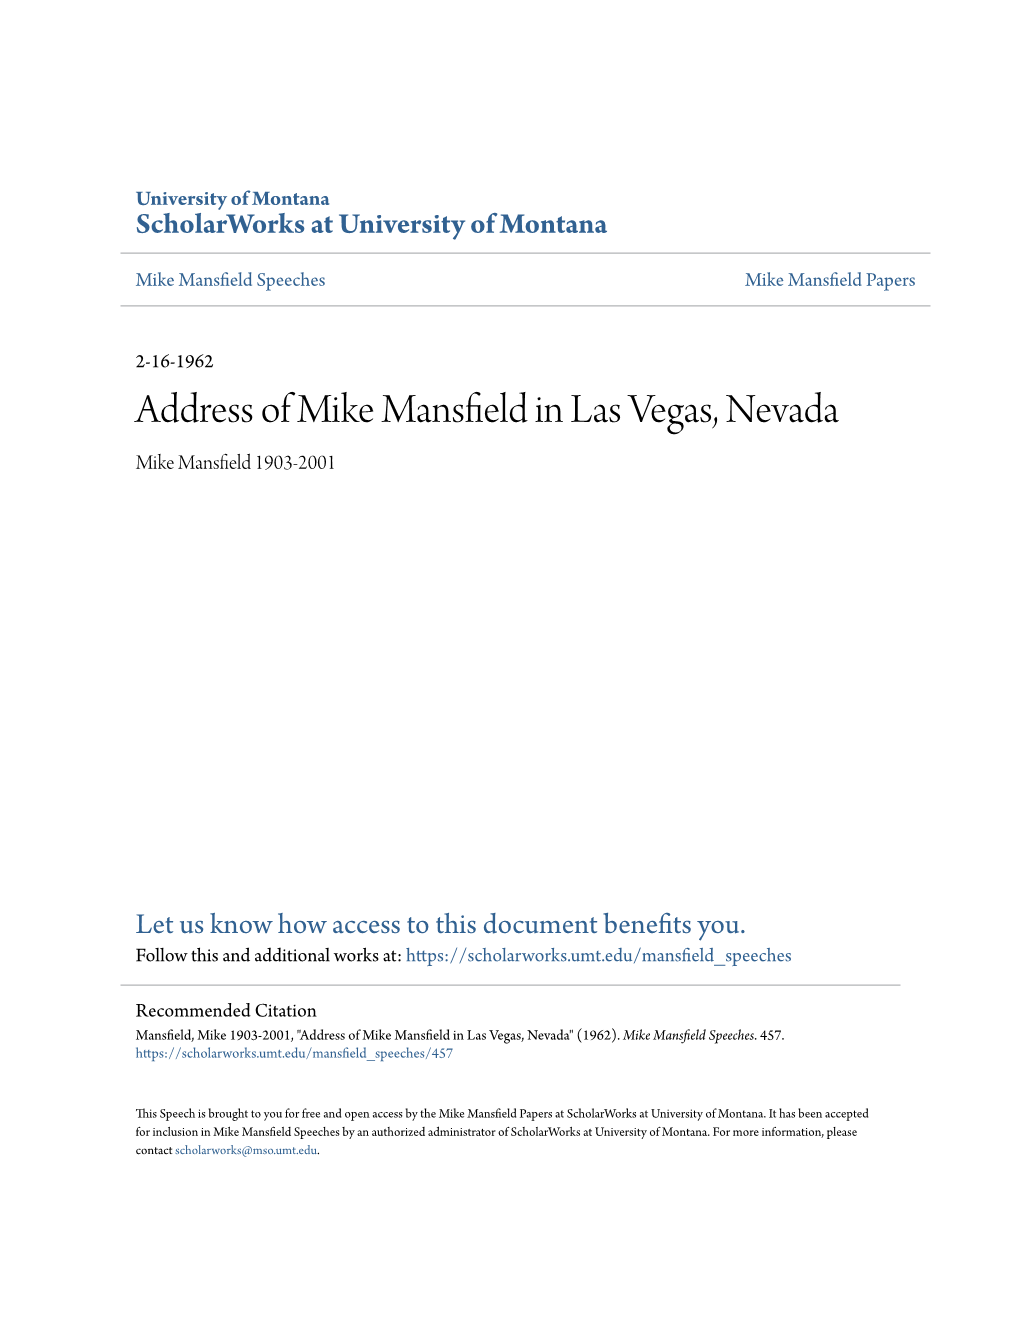 Address of Mike Mansfield in Las Vegas, Nevada Mike Mansfield 1903-2001